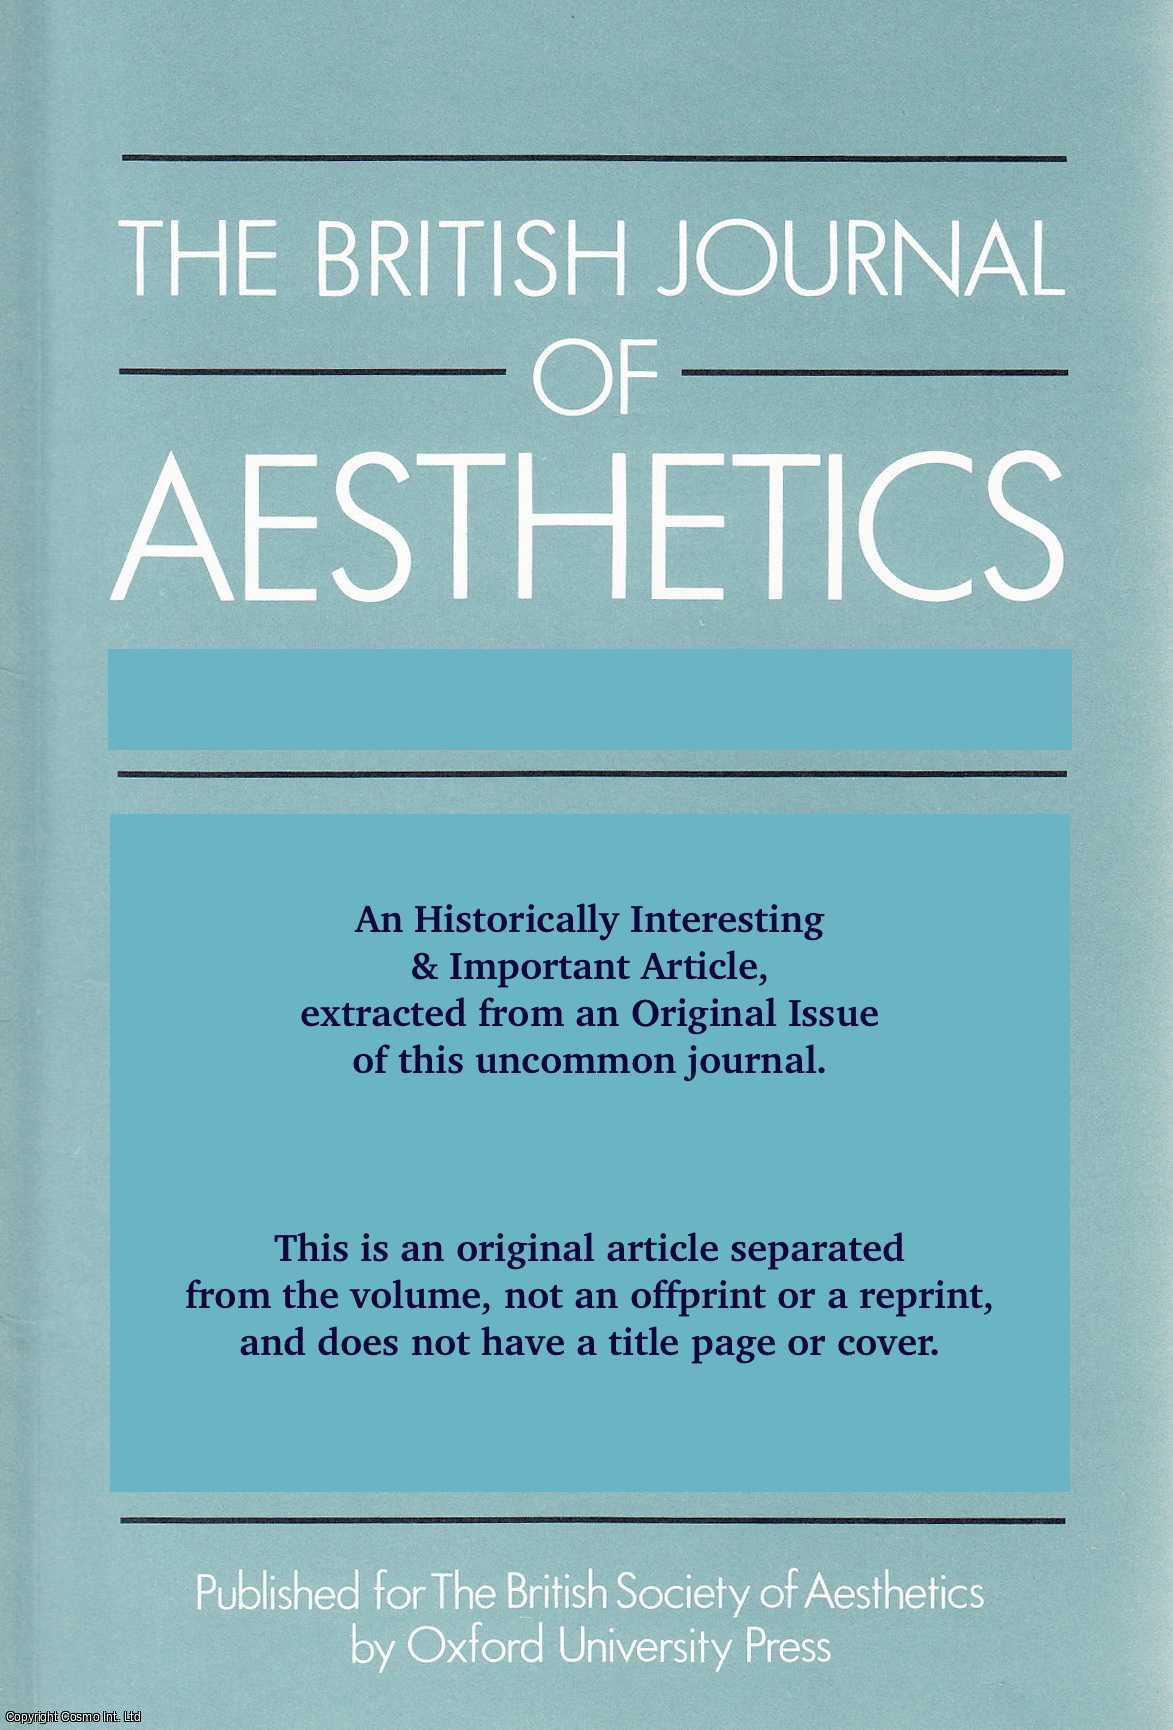 James D. Carney - A Kripkean Approach to Aesthetic Theories. An original article from the British Journal of Aesthetics, 1982.